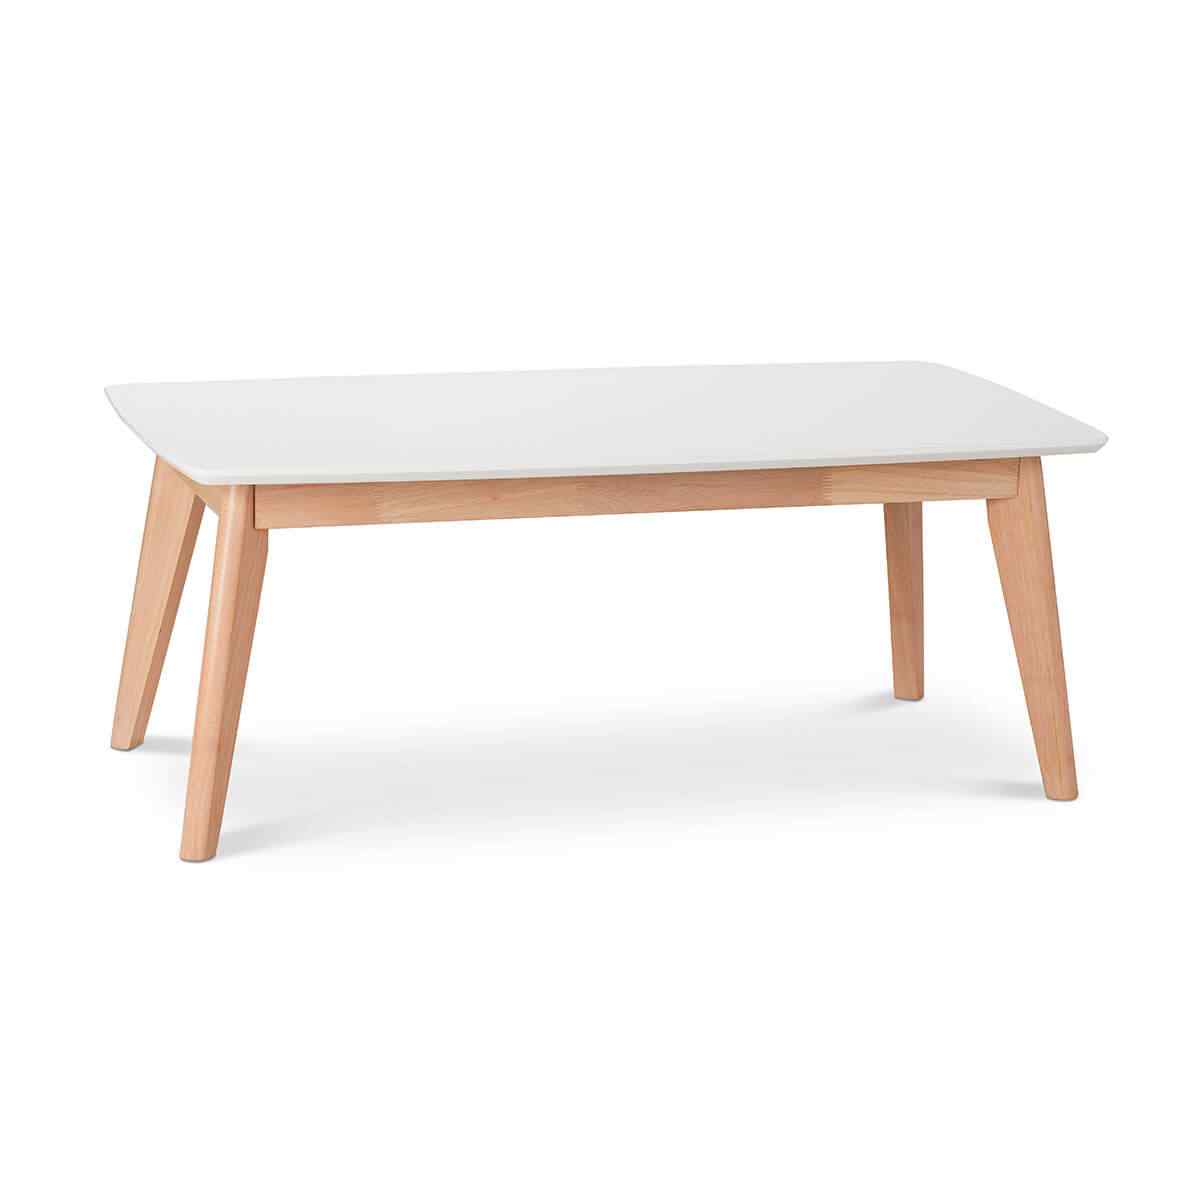 friendly how to use Logically Wooden white table - Med-Tech Construction